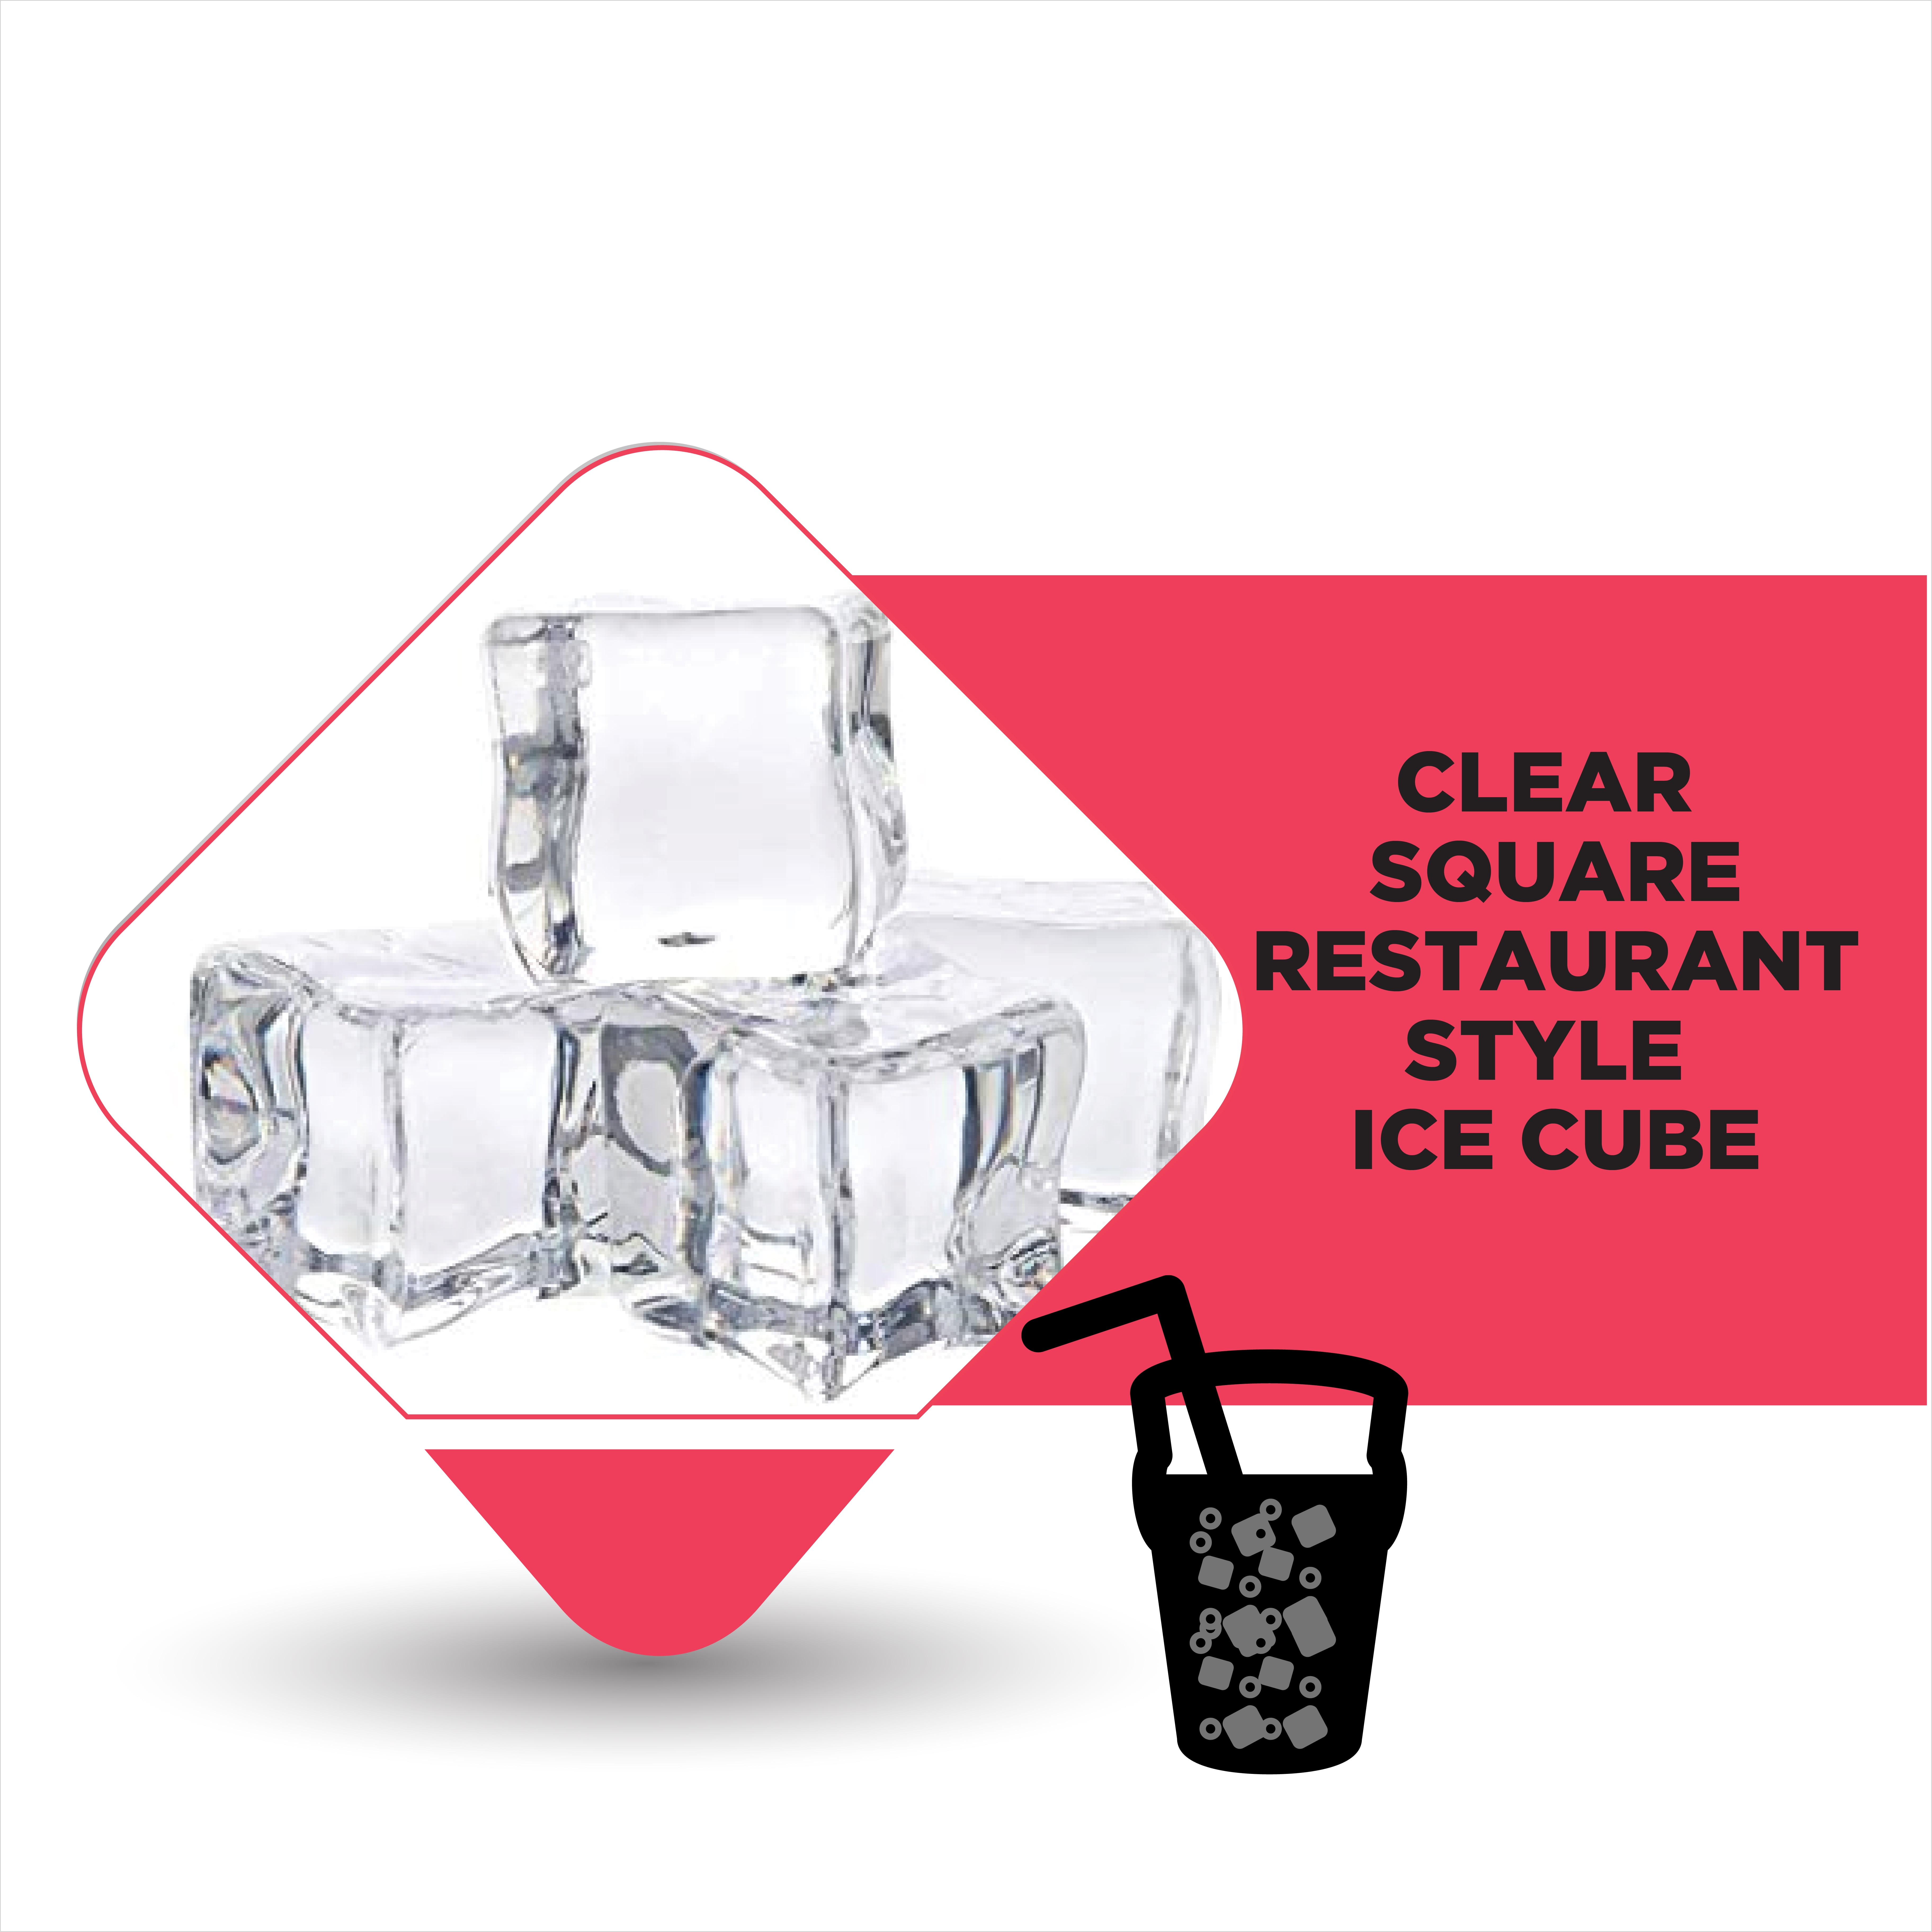 Restaurantware 2-Inch Square Ice Tray Makes 6 Cubes: Perfect for Commercial Bars or Home Use Constructed from Durable Black Silicone Dishwasher Safe 1-ct